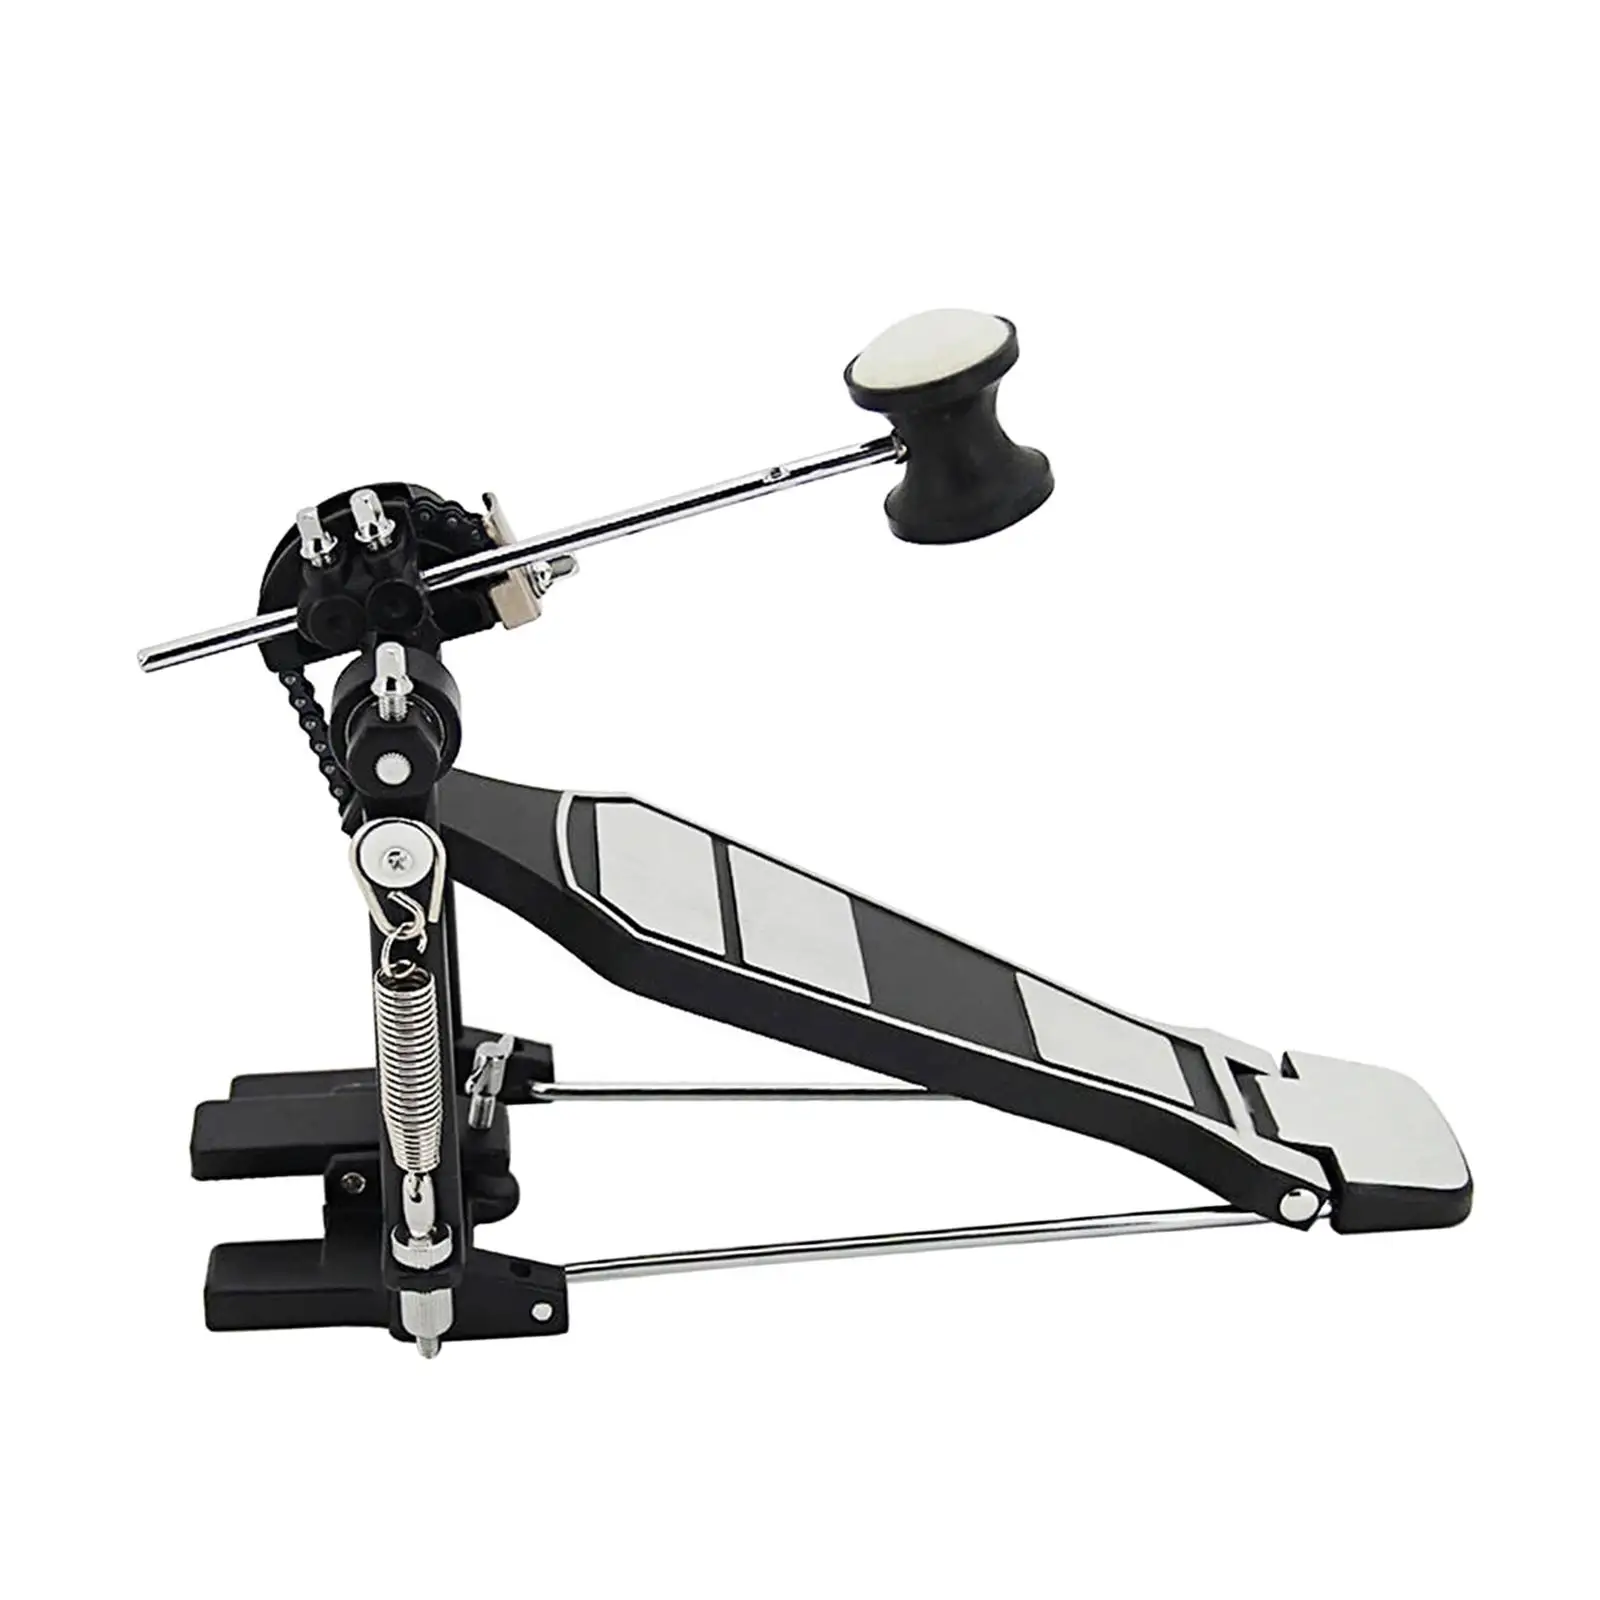 Bass Drum Pedal for Jazz Drums Drum Accessories Durable Drummer Gifts Professional Drum Practice Replacement Percussion Hardware